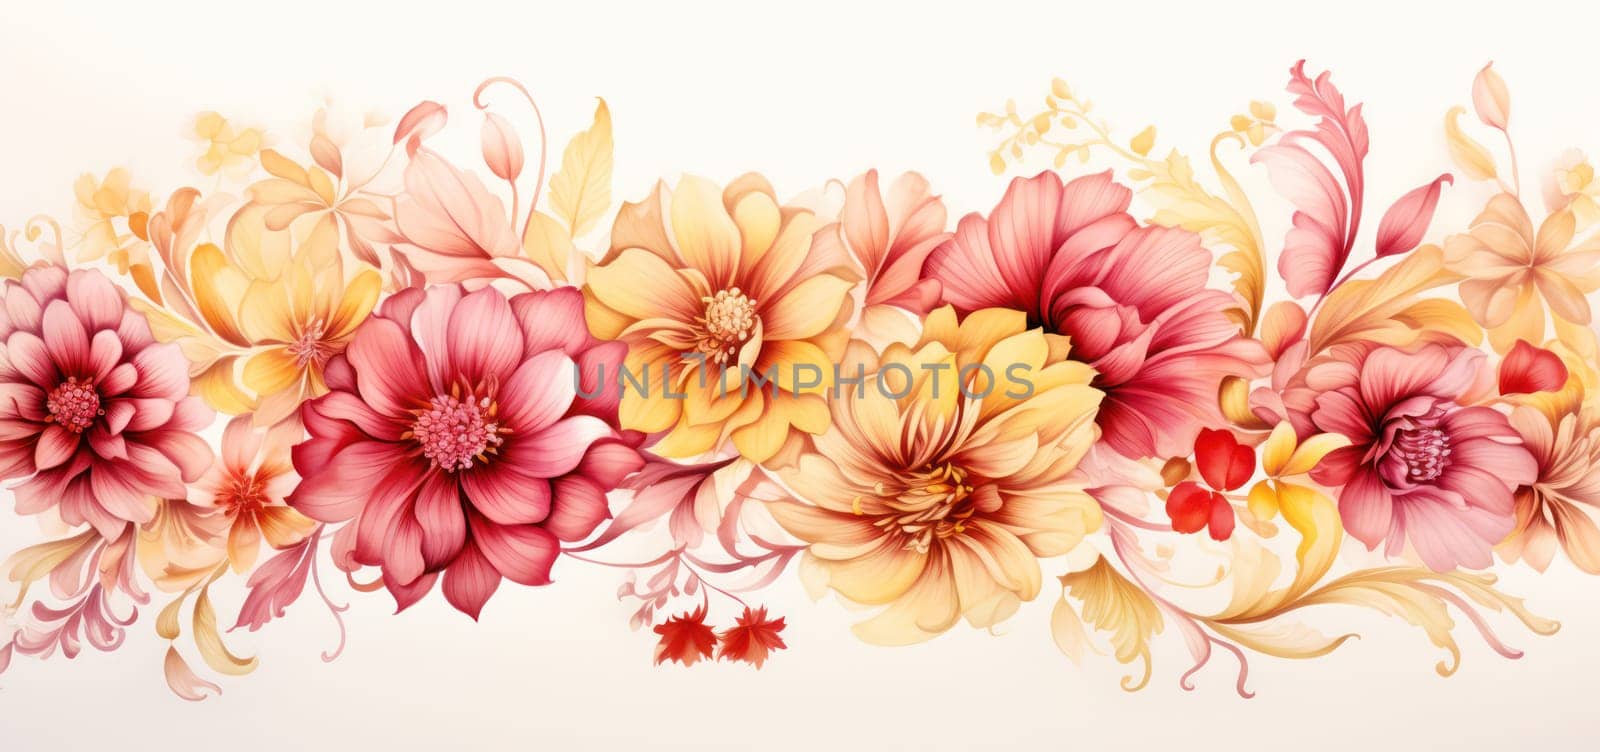 Romantic Floral Bouquet: A Colorful Watercolor Illustration of Beautiful Blooming Flowers on a Vintage Retro Background by Vichizh